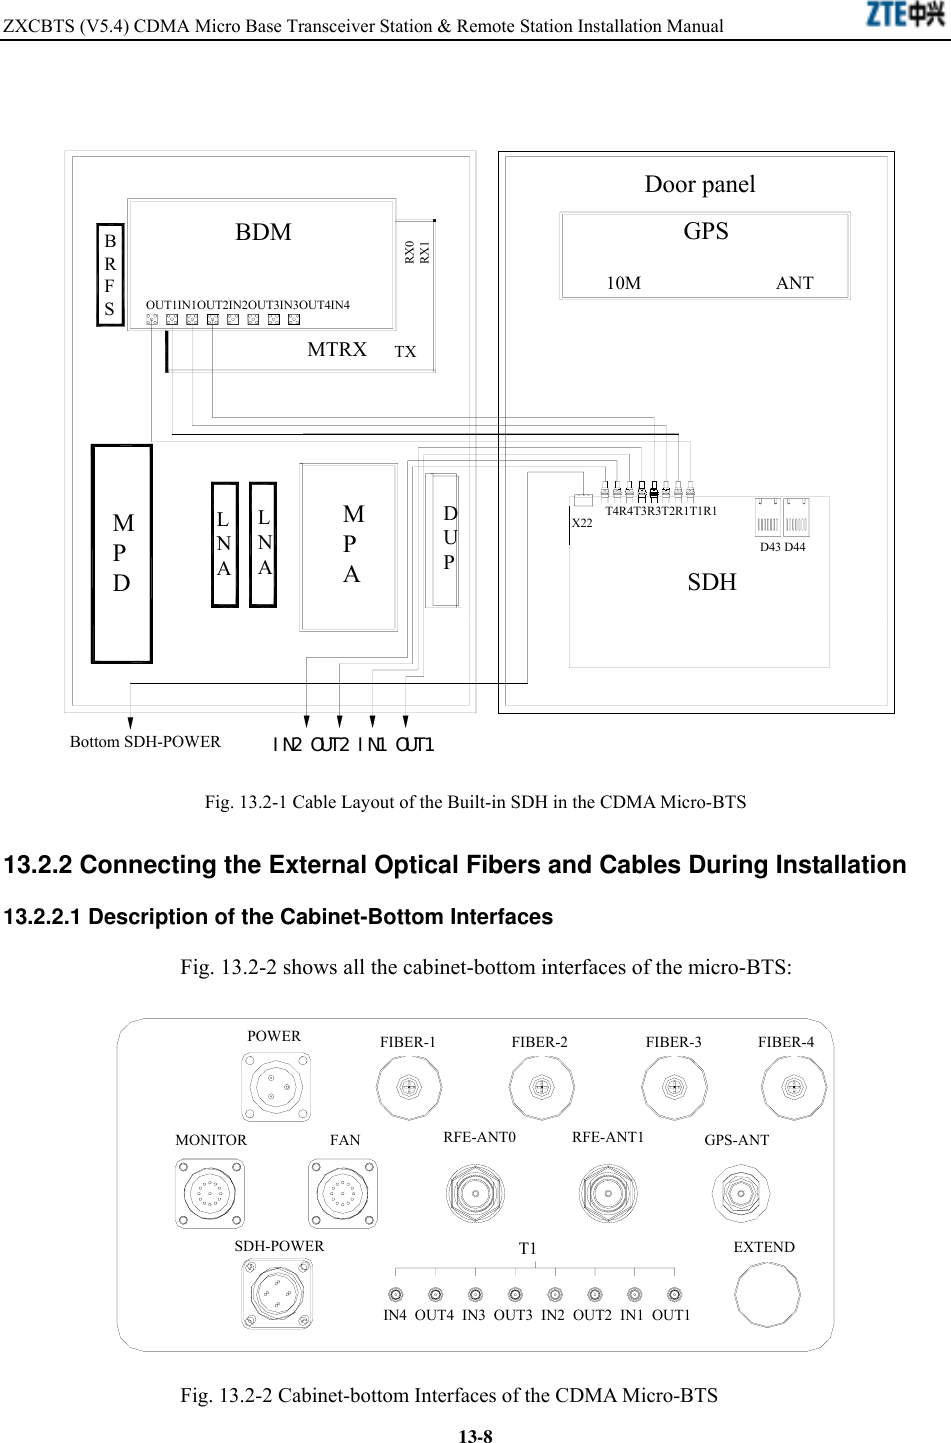 ZXCBTS (V5.4) CDMA Micro Base Transceiver Station &amp; Remote Station Installation Manual    13-8 Door panelGPSBDMBottom SDH-POWERSDHMPDLNALNAMPADUPIN2 OUT2 IN1 OUT1ANT10MBRFSMTRX TXRX0RX1D43 D44T4R4T3R3T2R1T1R1X22OUT1IN1OUT2IN2OUT3IN3OUT4IN4 Fig. 13.2-1 Cable Layout of the Built-in SDH in the CDMA Micro-BTS 13.2.2 Connecting the External Optical Fibers and Cables During Installation 13.2.2.1 Description of the Cabinet-Bottom Interfaces Fig. 13.2-2 shows all the cabinet-bottom interfaces of the micro-BTS:   POWER FIBER-1 FIBER-2 FIBER-3 FIBER-4MONITOR FAN RFE-ANT0 RFE-ANT1 GPS-ANTEXTENDT1SDH-POWERIN4  OUT4  IN3  OUT3  IN2  OUT2  IN1  OUT1 Fig. 13.2-2 Cabinet-bottom Interfaces of the CDMA Micro-BTS 